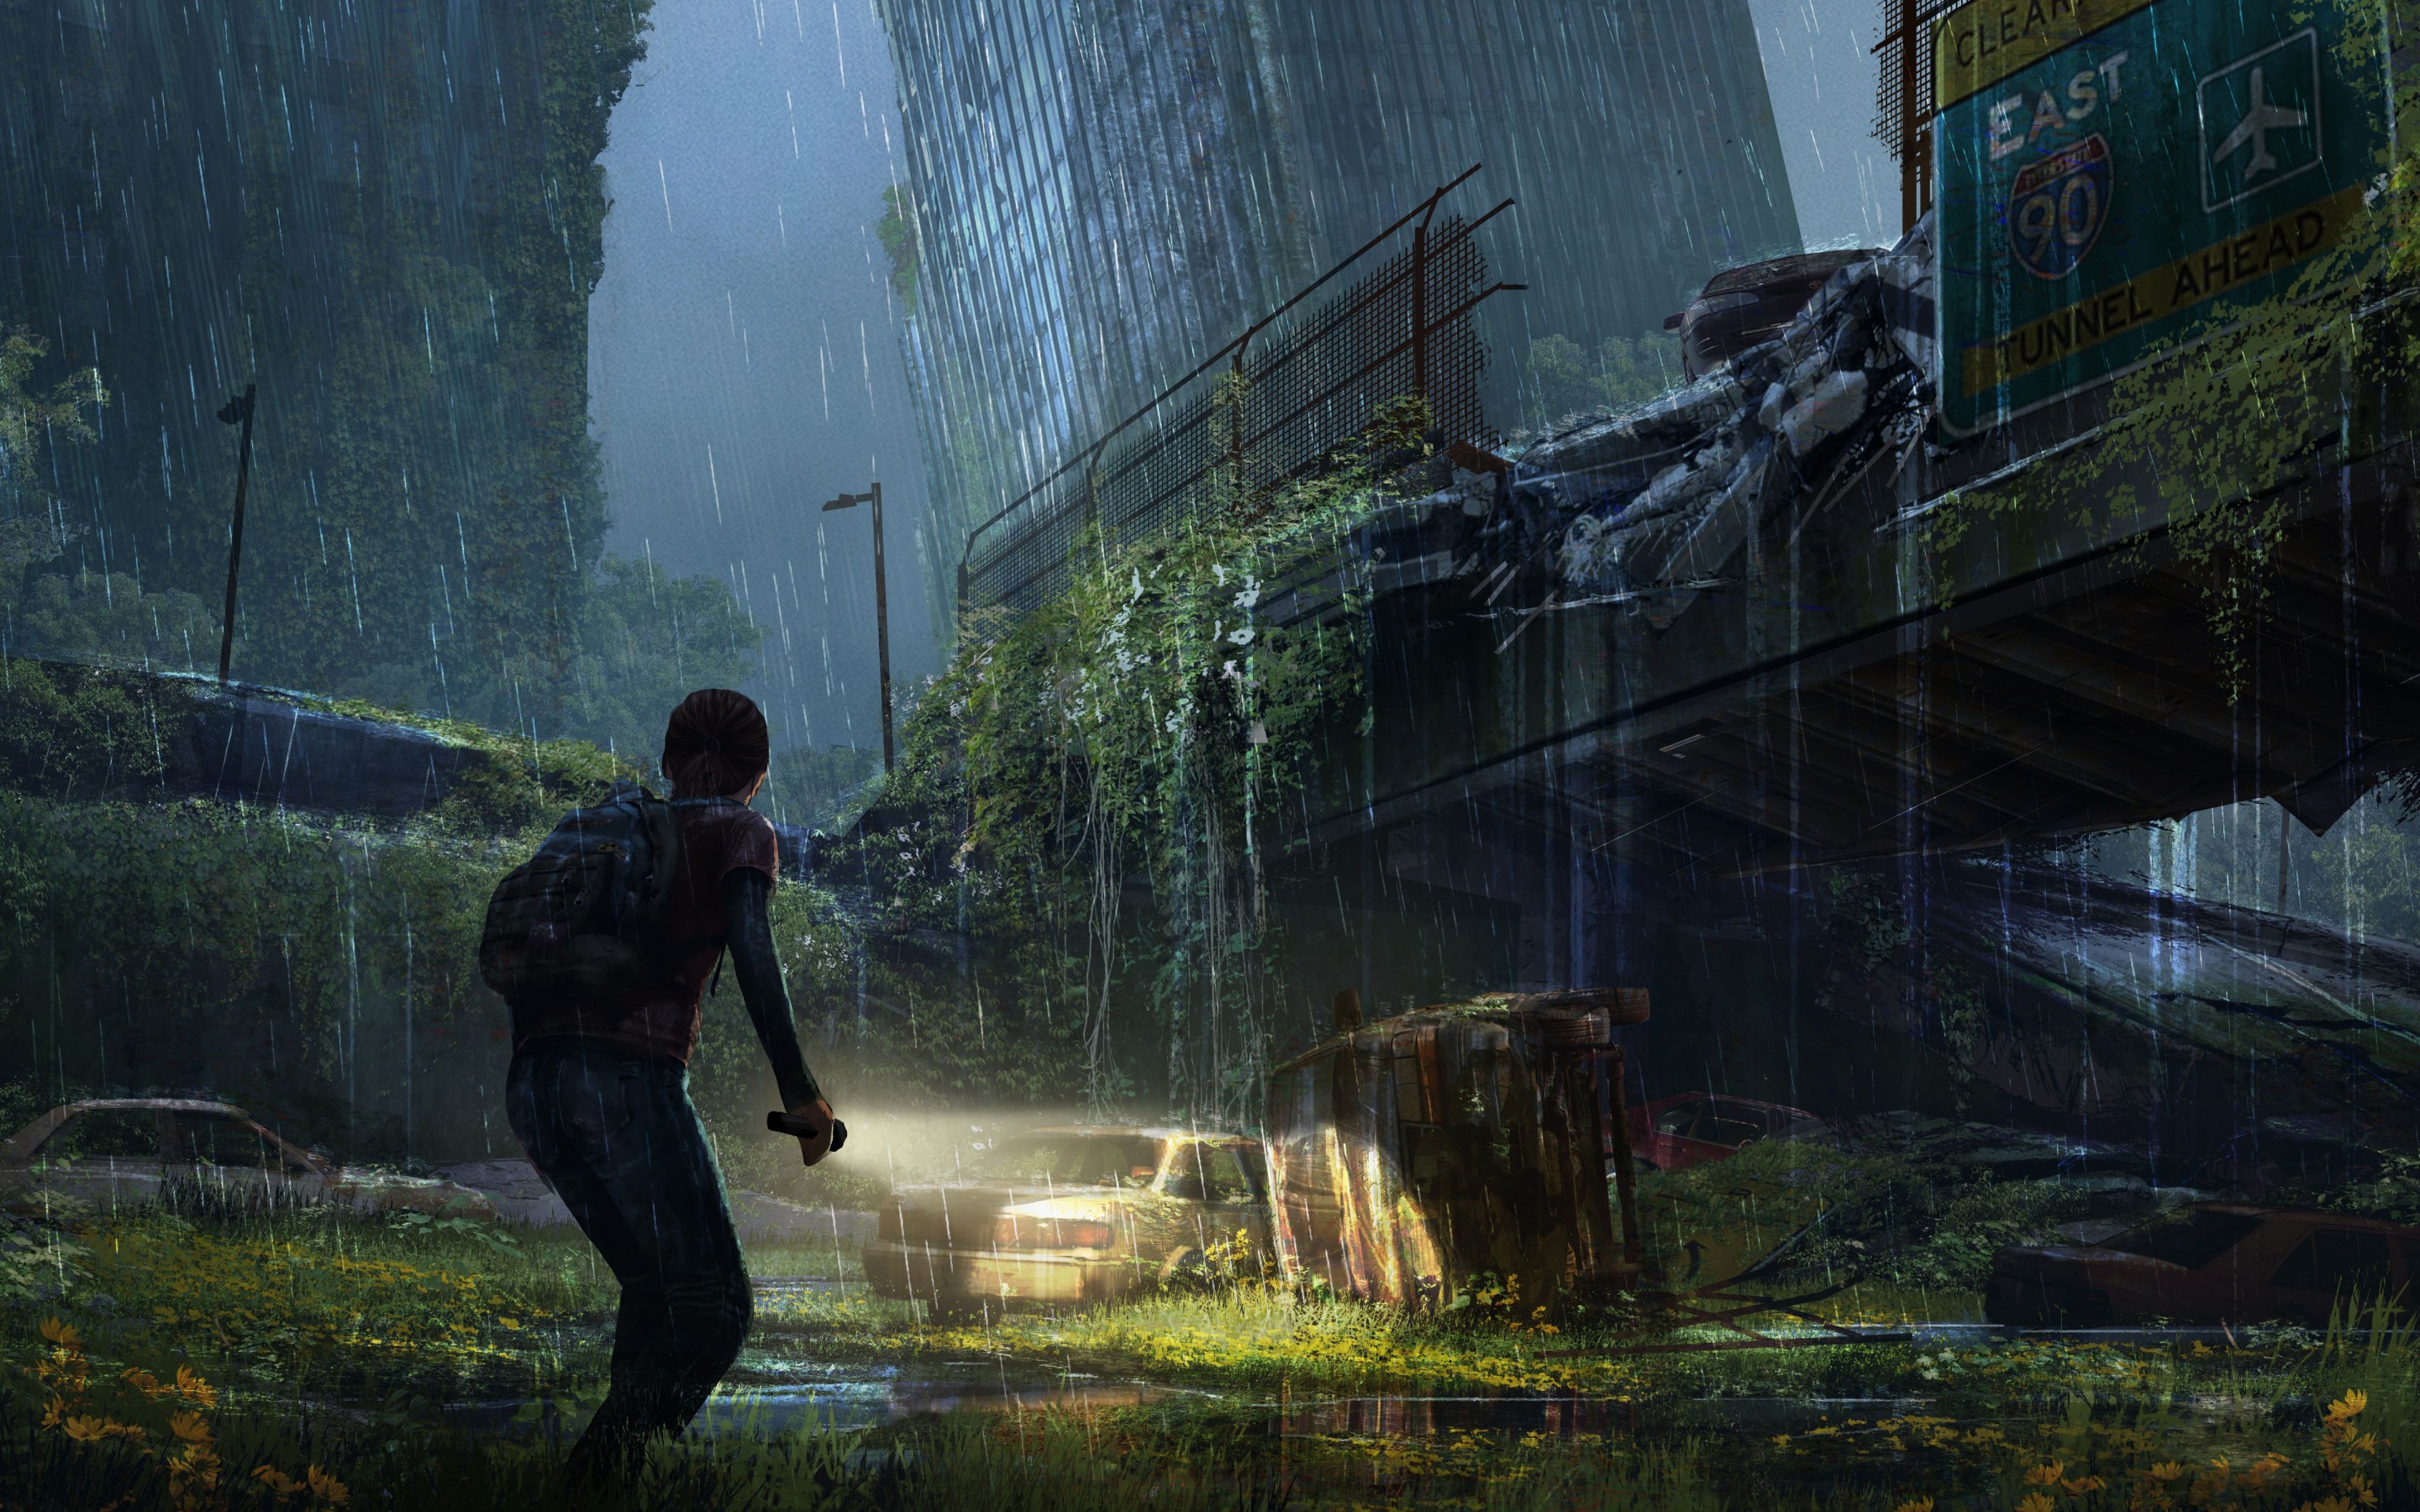 Download wallpapers 2880x1800 the last of us, apocalypse, girl, city